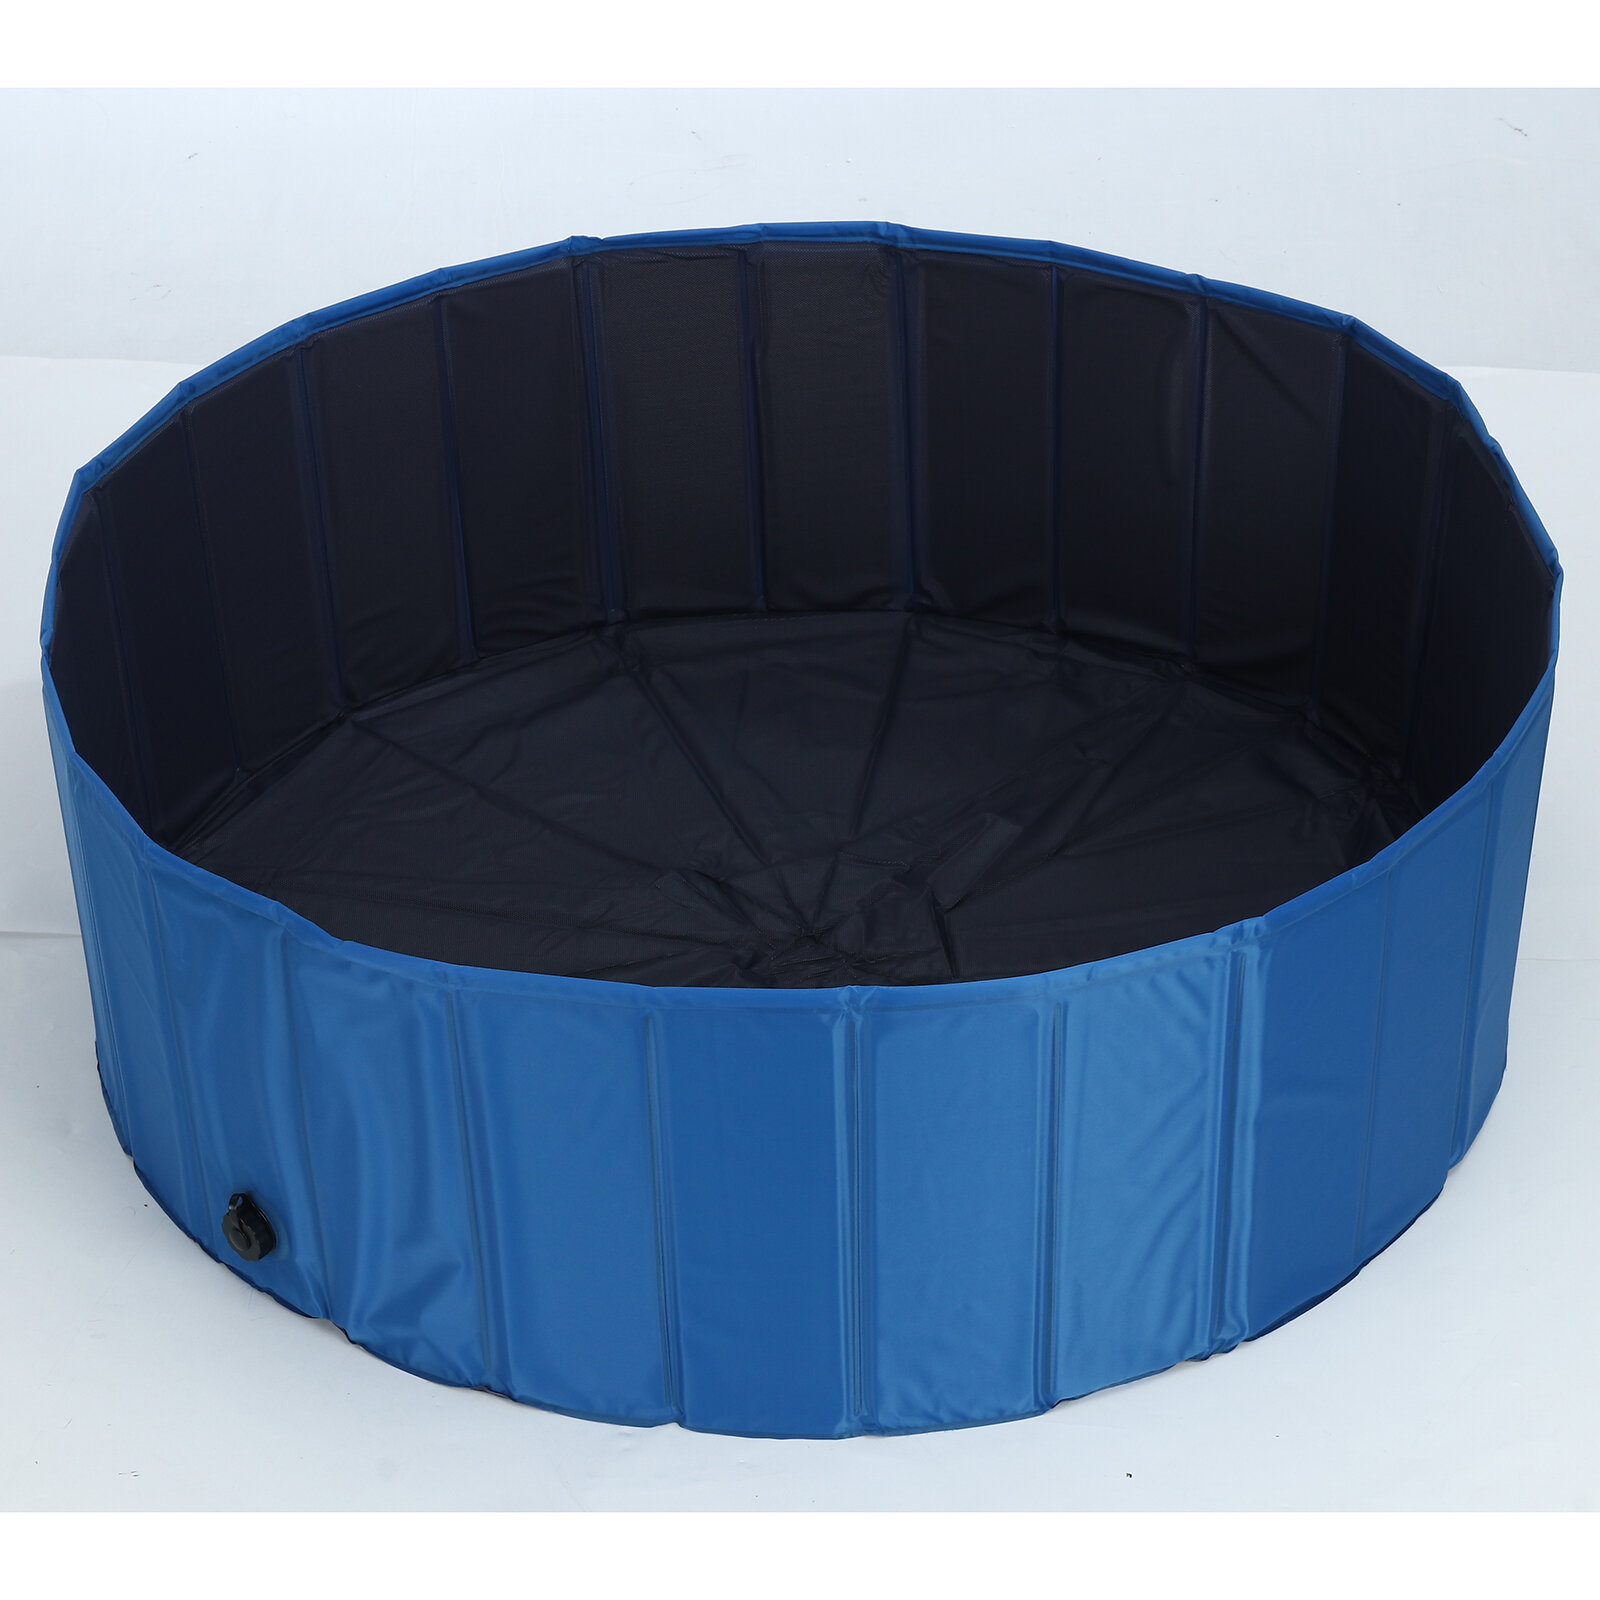 Collapsible Portable Pet Bath Pool Kids And Pets Friendly Material Easy Assembly Suitable for Kids, Cats, Dogs or Other